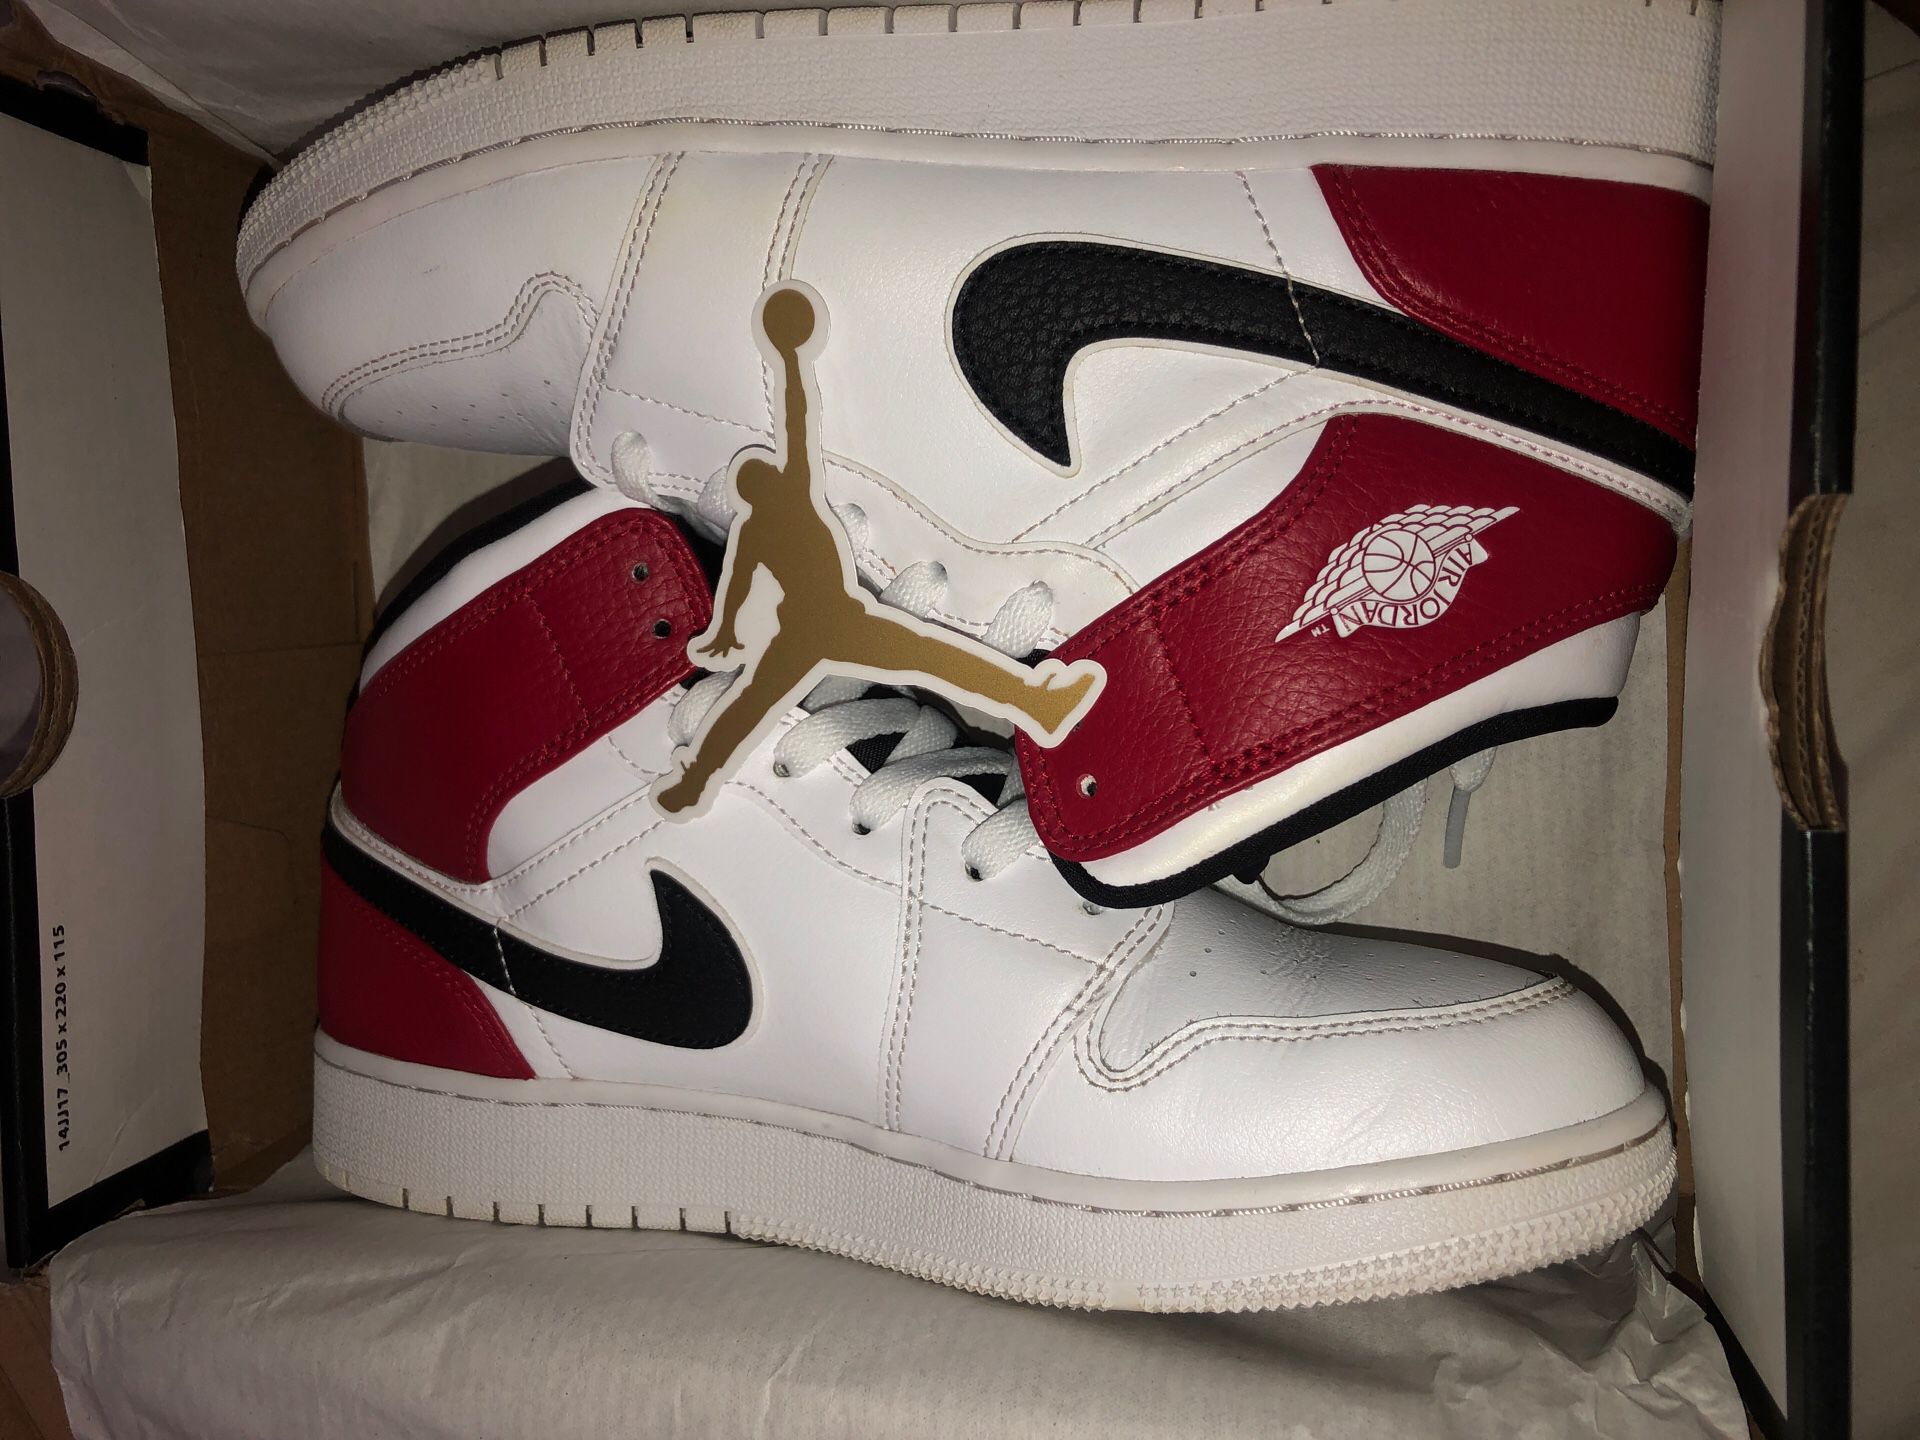 Jordan 1 mid white/black Gym Red for Sale in Los Angeles, CA - OfferUp